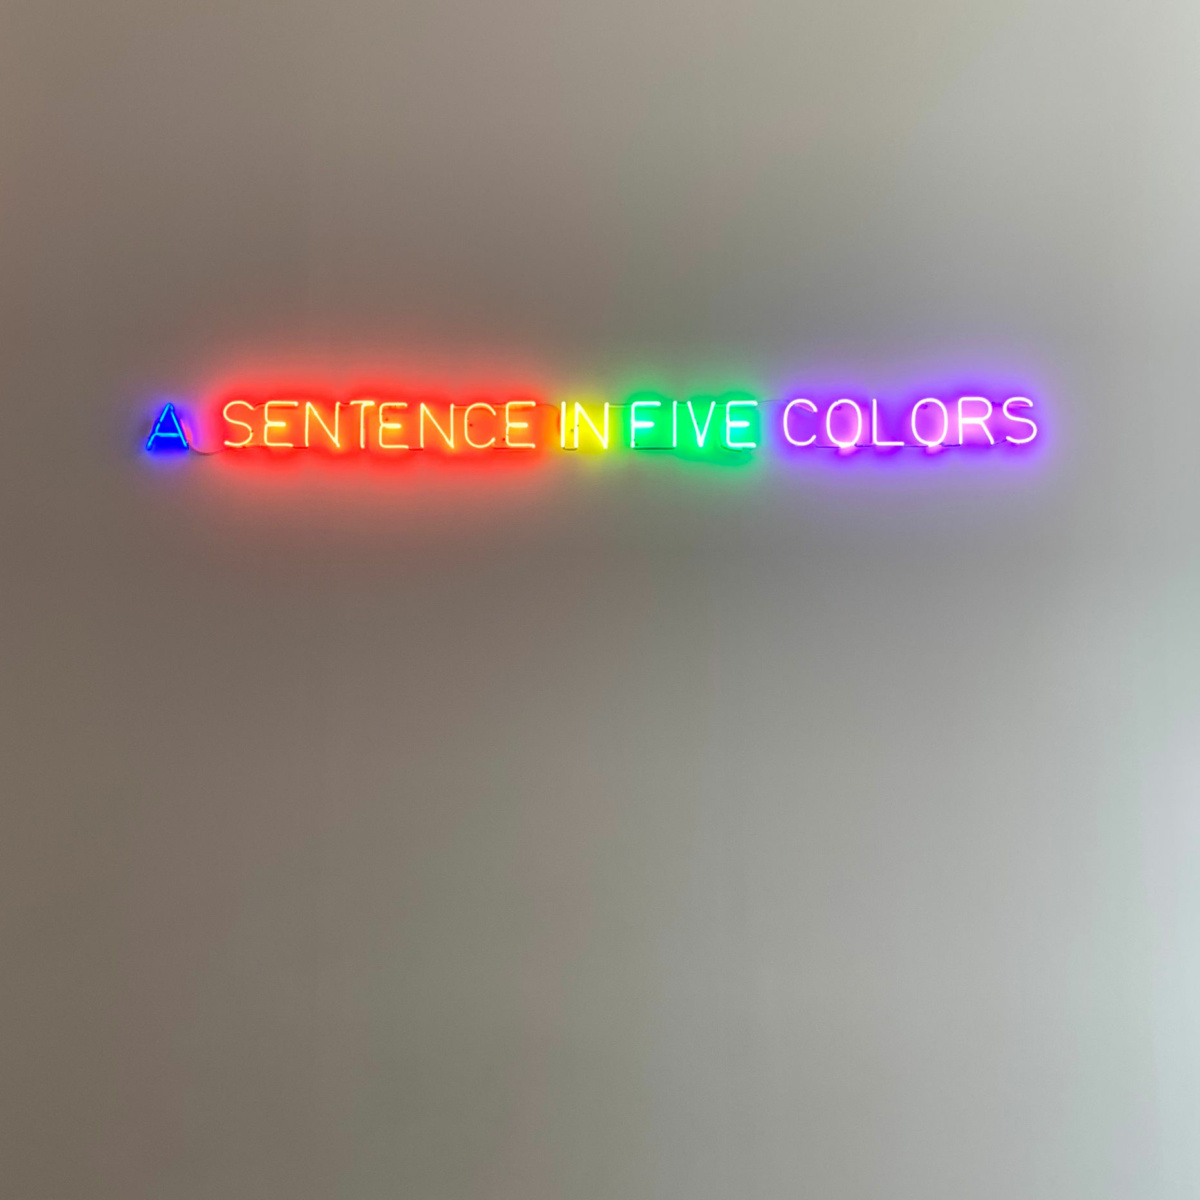 "Self-defined in five colors," neon artwork by Joseph Kosuth at Foundation Louis Vuitton in Paris.